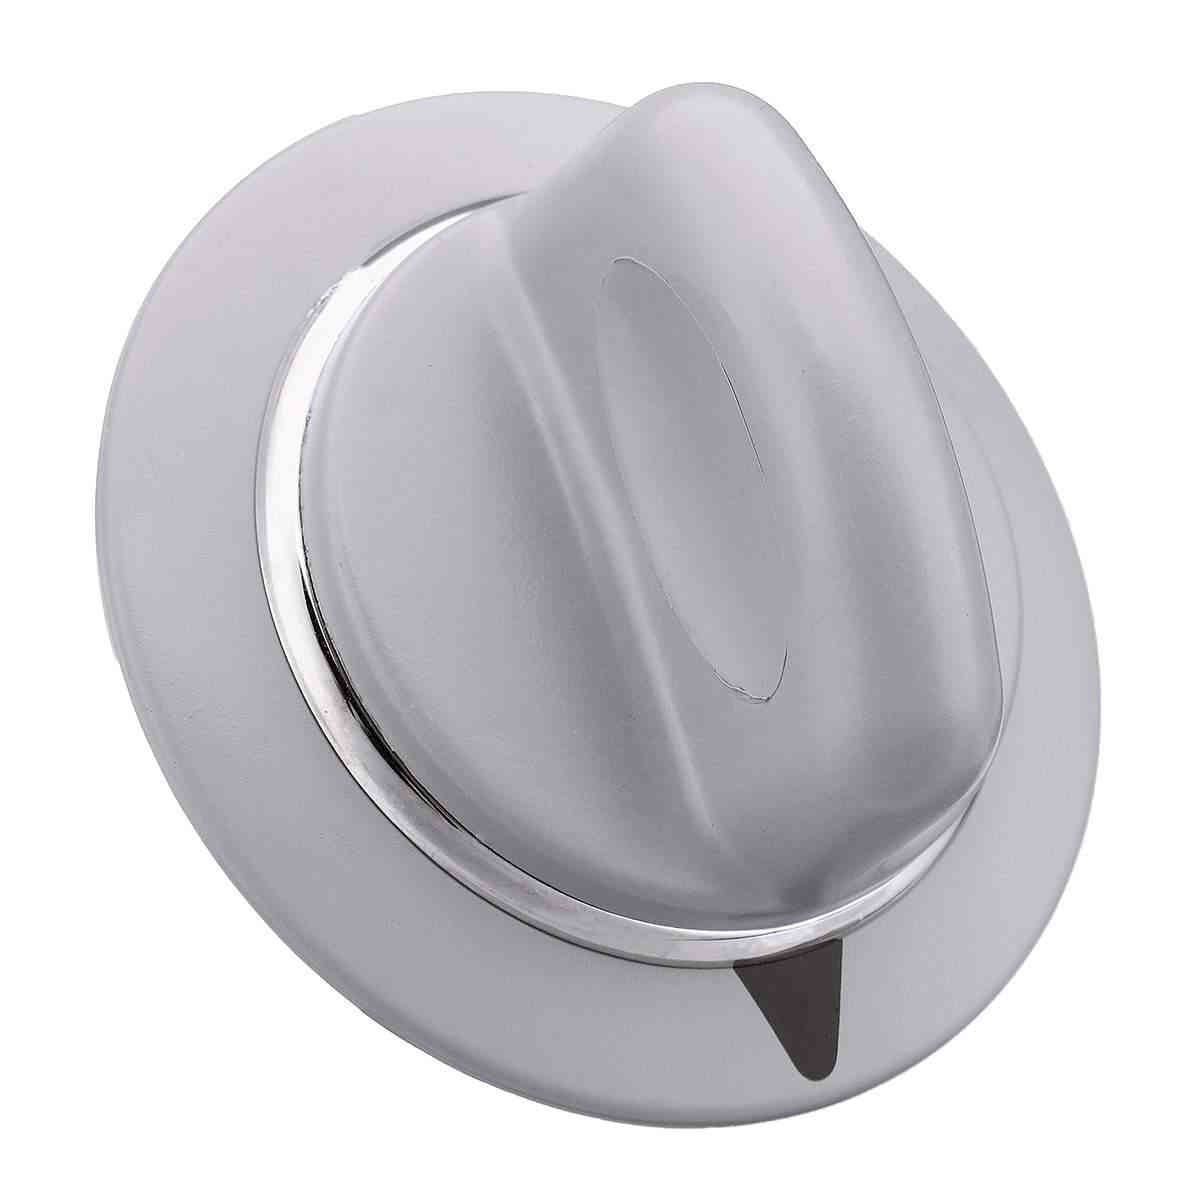 Dryer Timer Control Knob For Electric Dryer